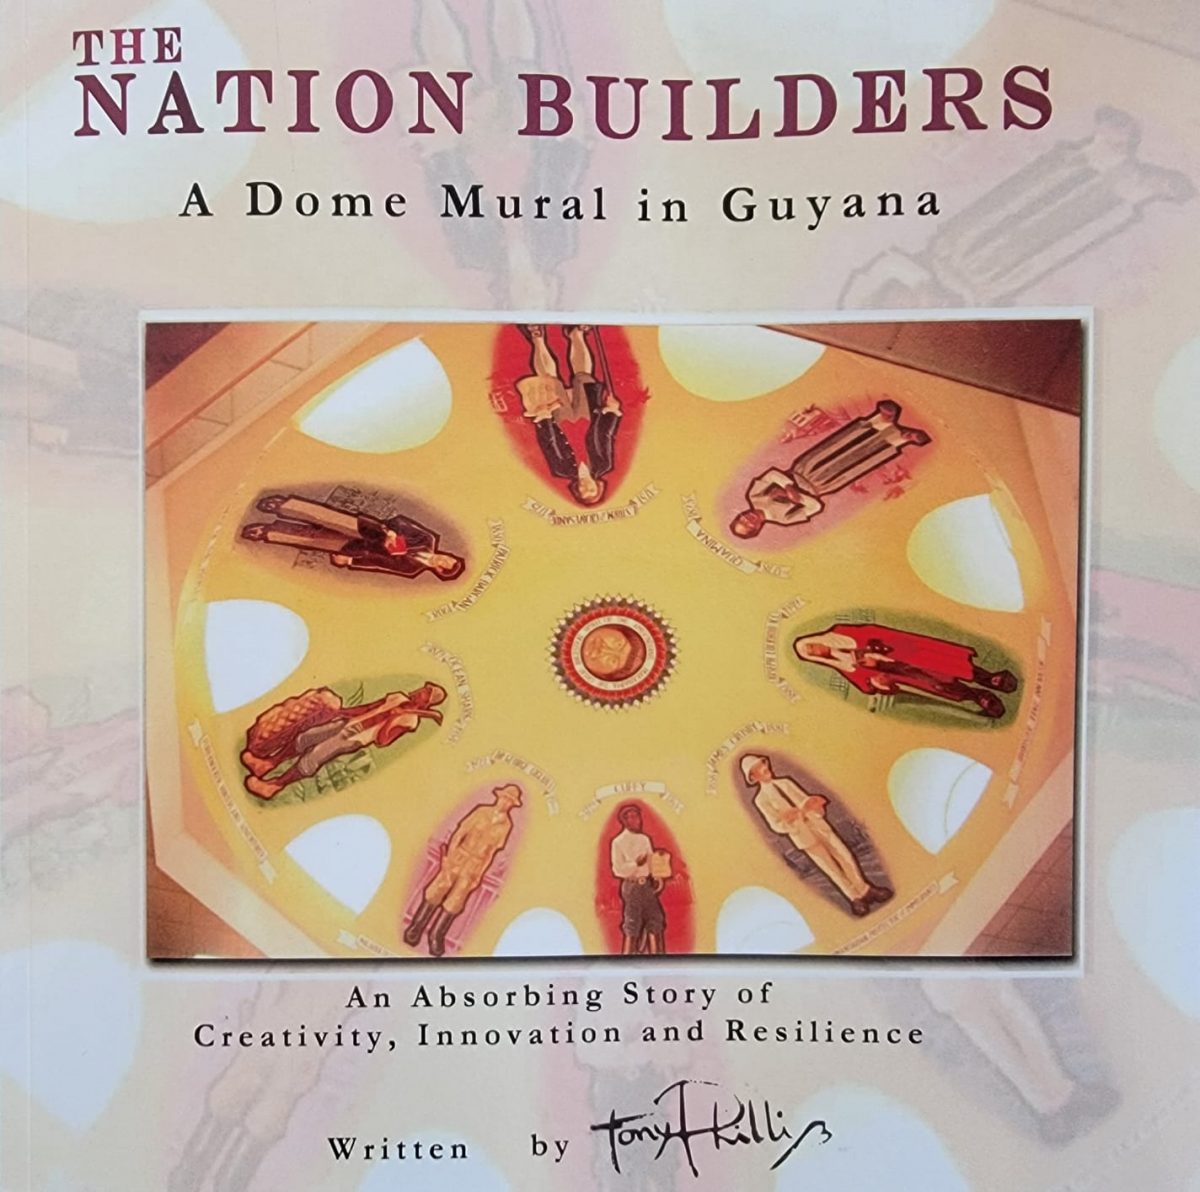 Tony Phillips. The Nation Builders: A Dome Mural in Guyana. Amazon, 2021. XXiii + 150 pp 
